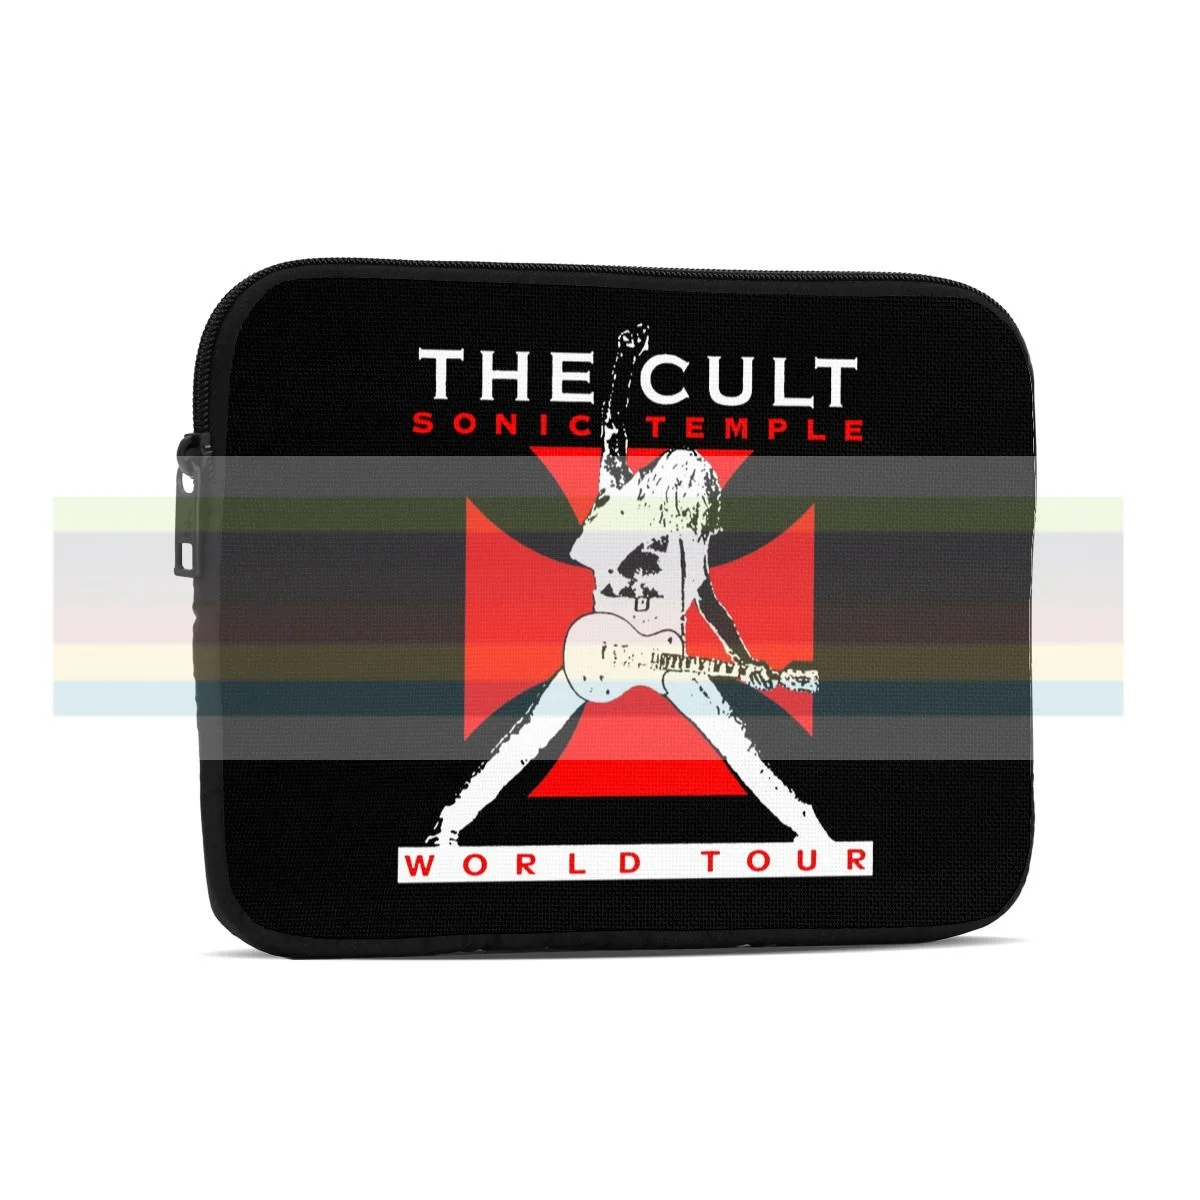 

The Cult Sonic Temple 89 Tour. Universal for children and adults. Tablet bag. Tablet bag. Ipad bag. Waterproof